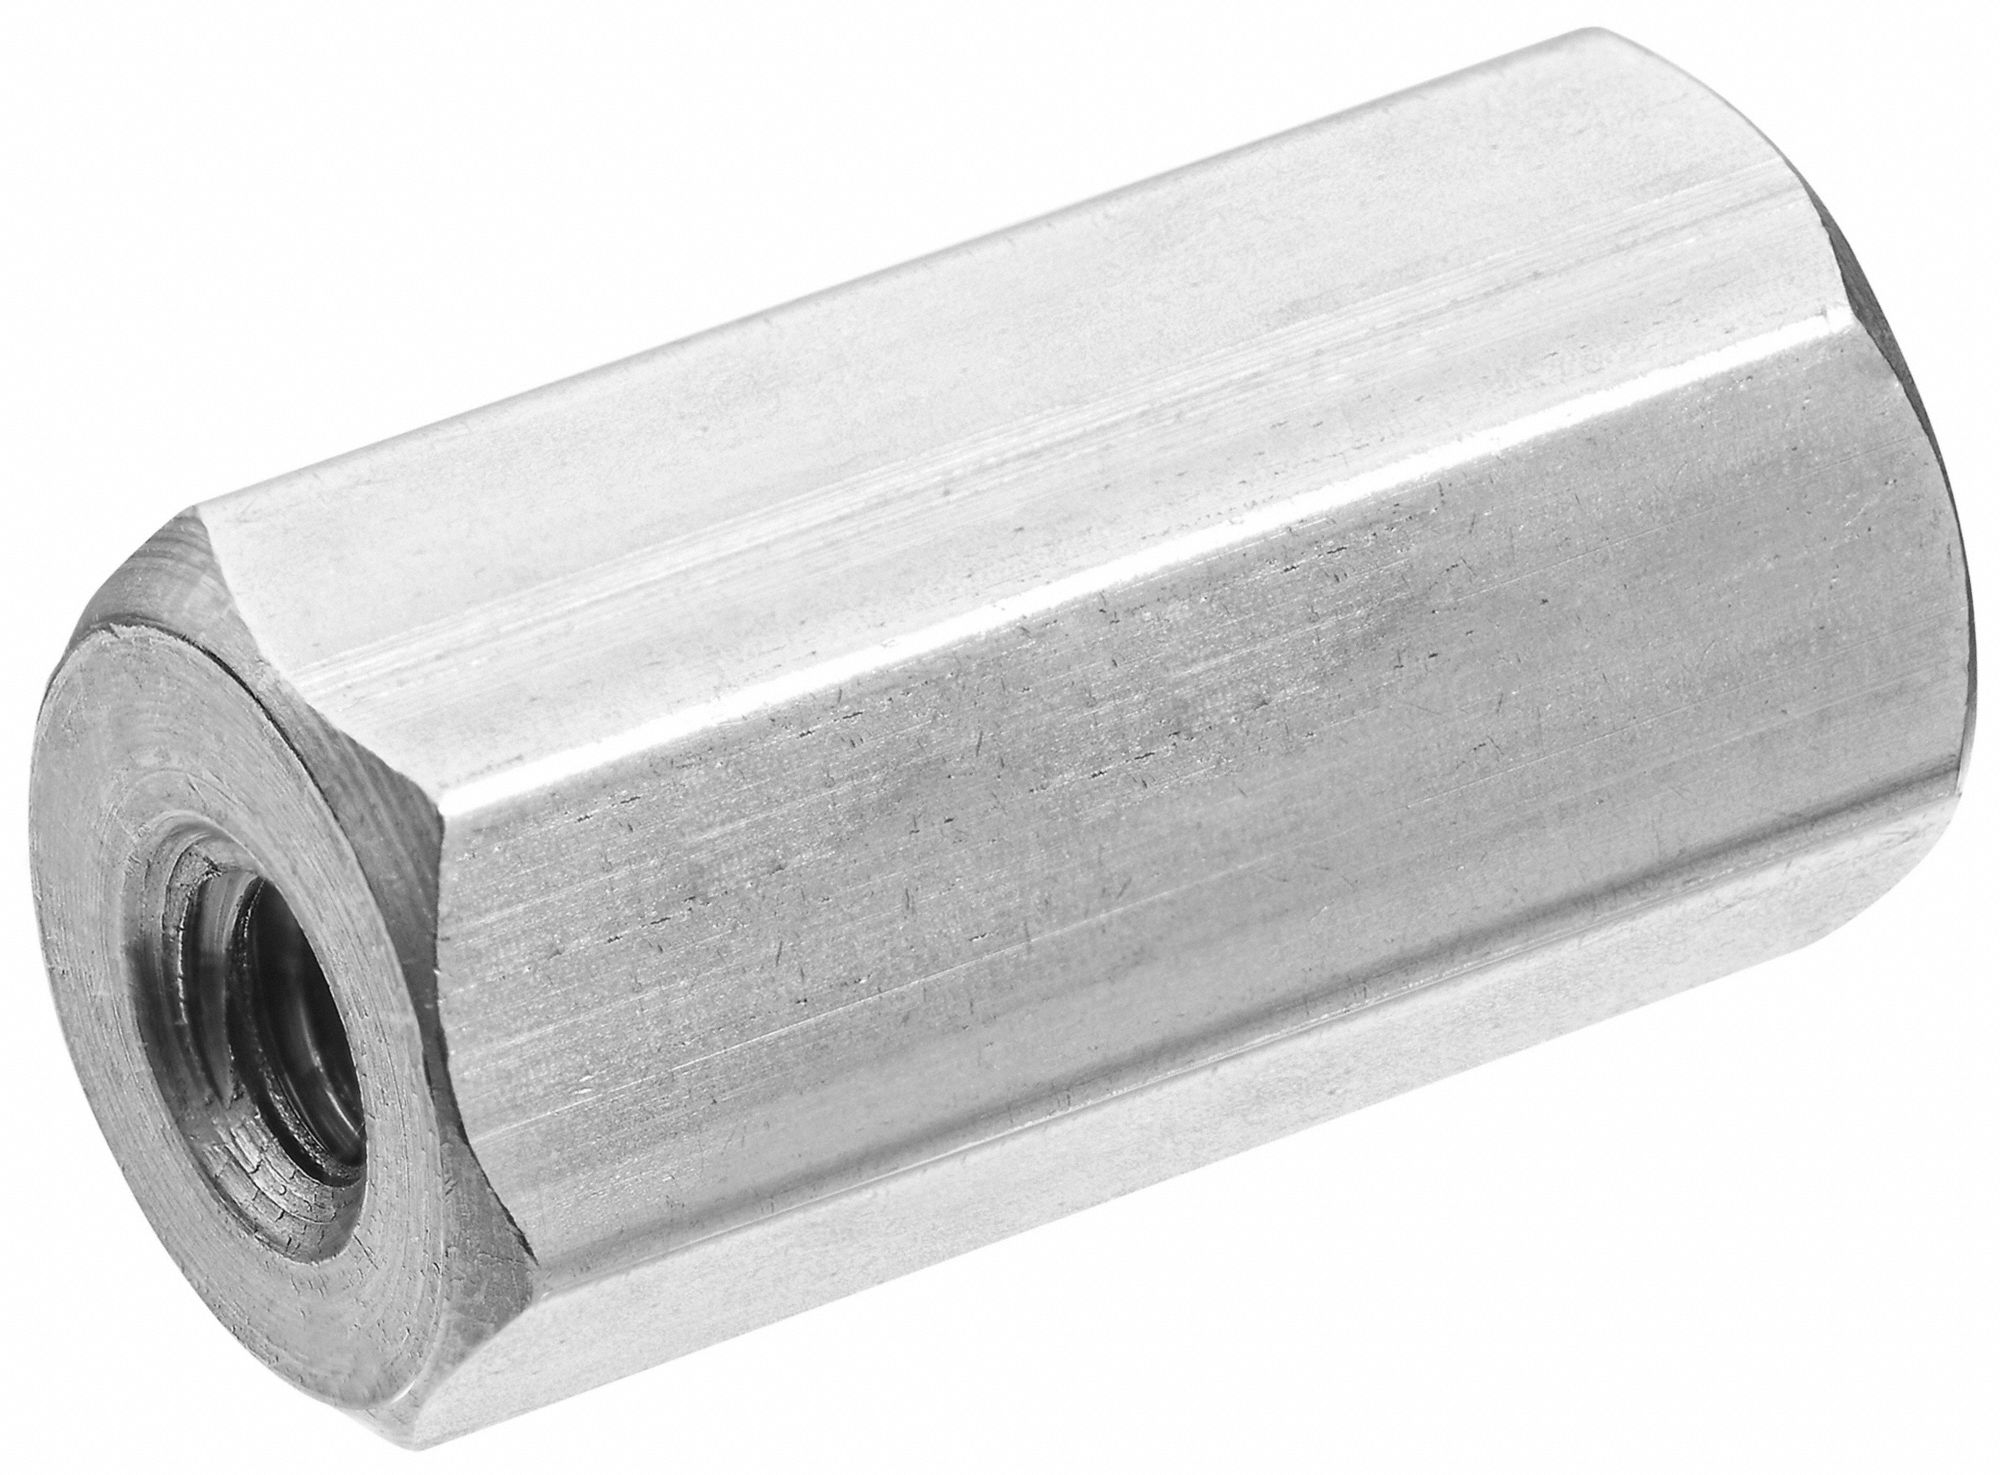 USA SEALING Hex Standoff: 18-8 Stainless Steel, 6 mm Hex Wd, 13 mm Body .